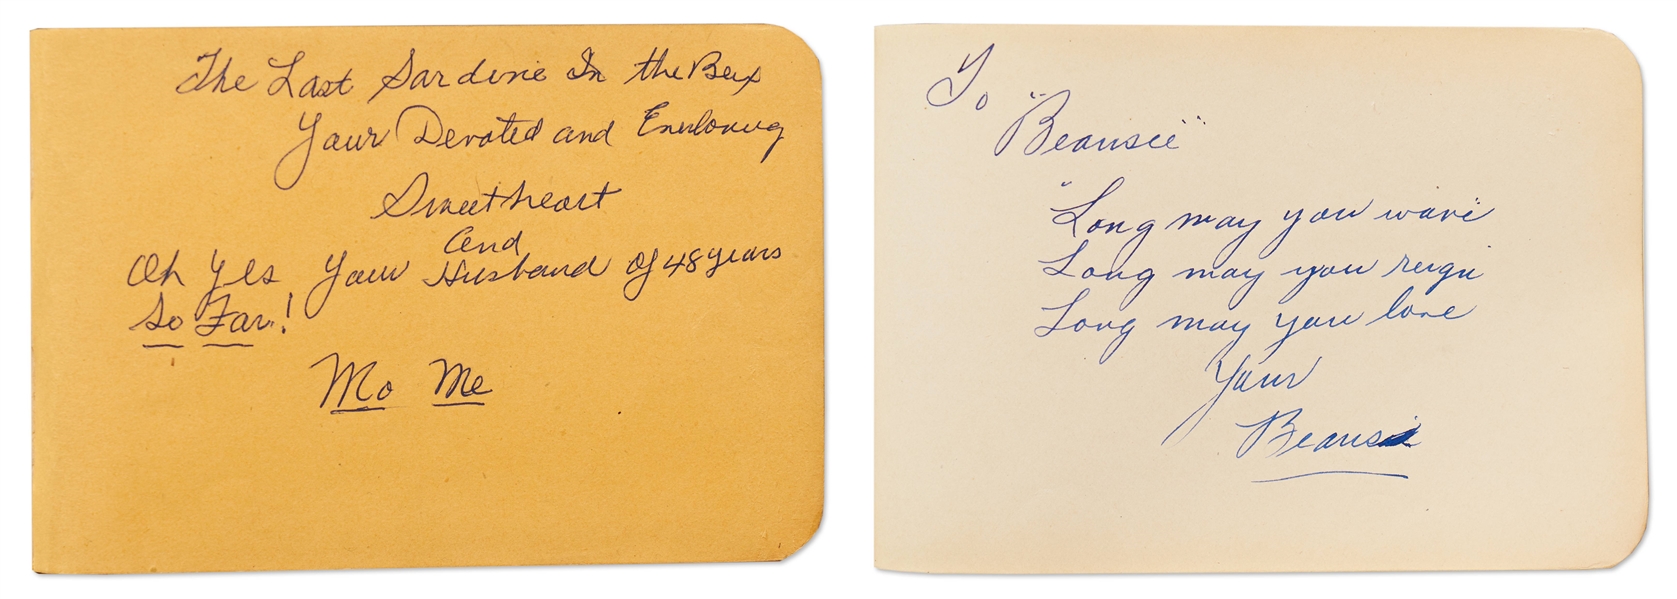 Autograph Album Signed Twice by Moe Howard with His Family Nicknames, ''Mo Me'' & ''Beansie'' -- Plus Moe & Helen's Wedding Card, 24 Postcards from Helen & Moe from the 1950s-60s & More Personal Items